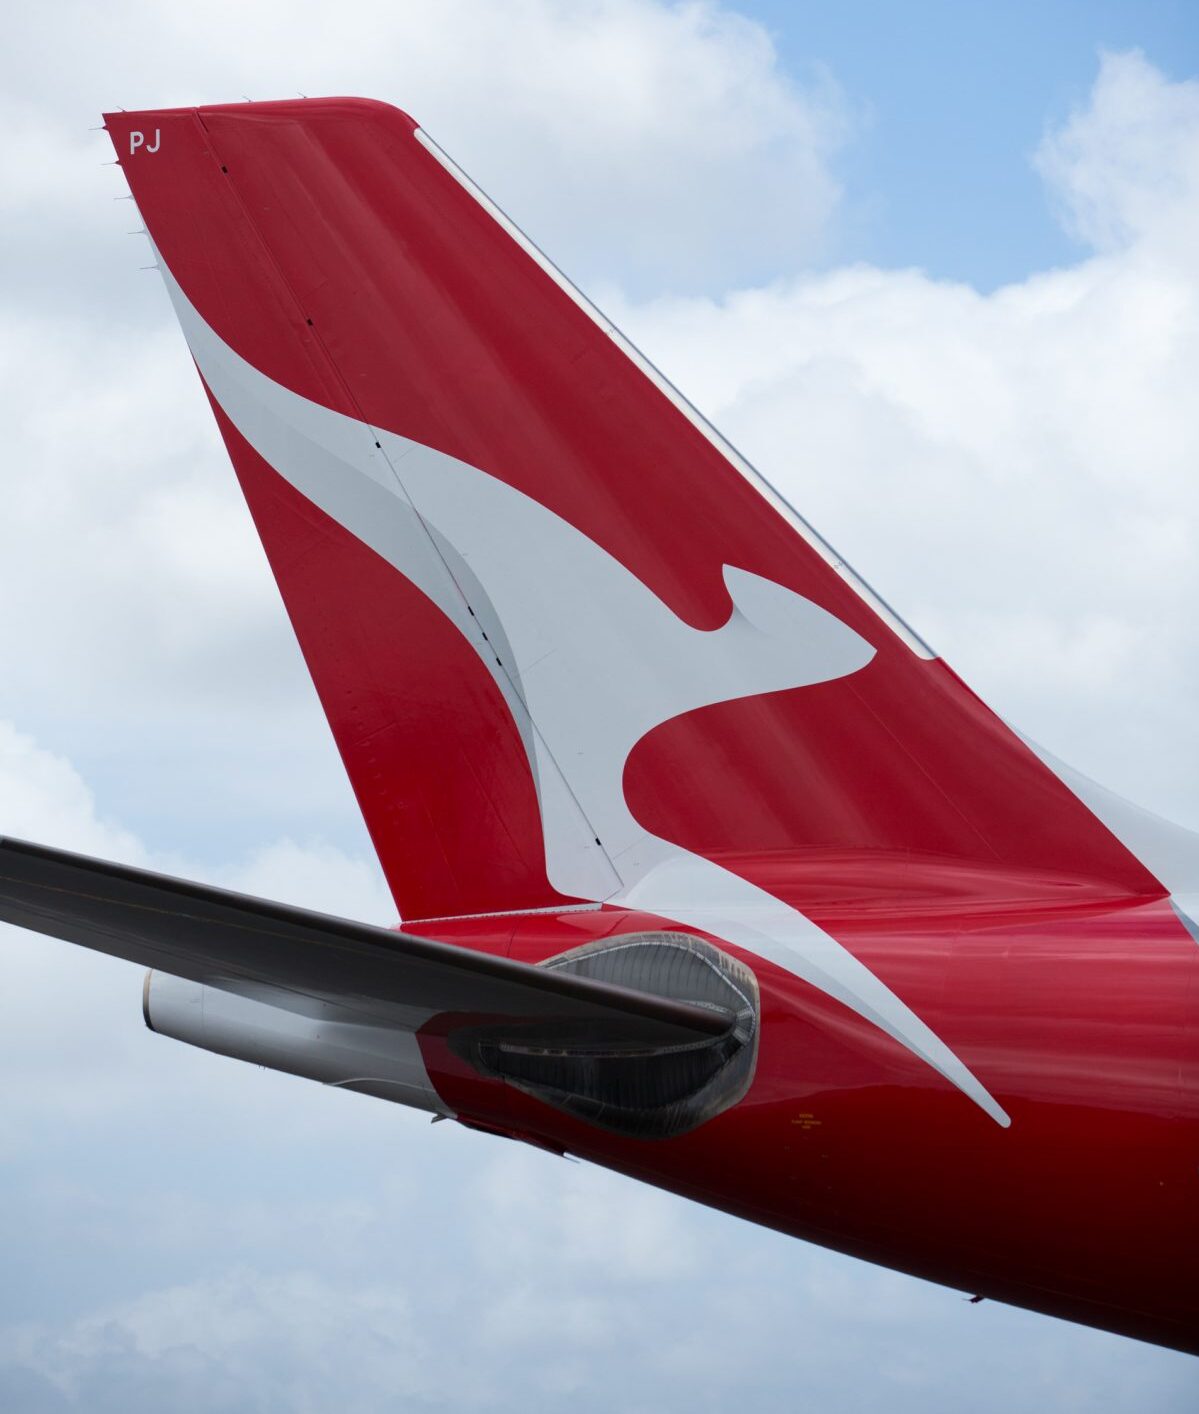 Doug Parker to join the Qantas Board